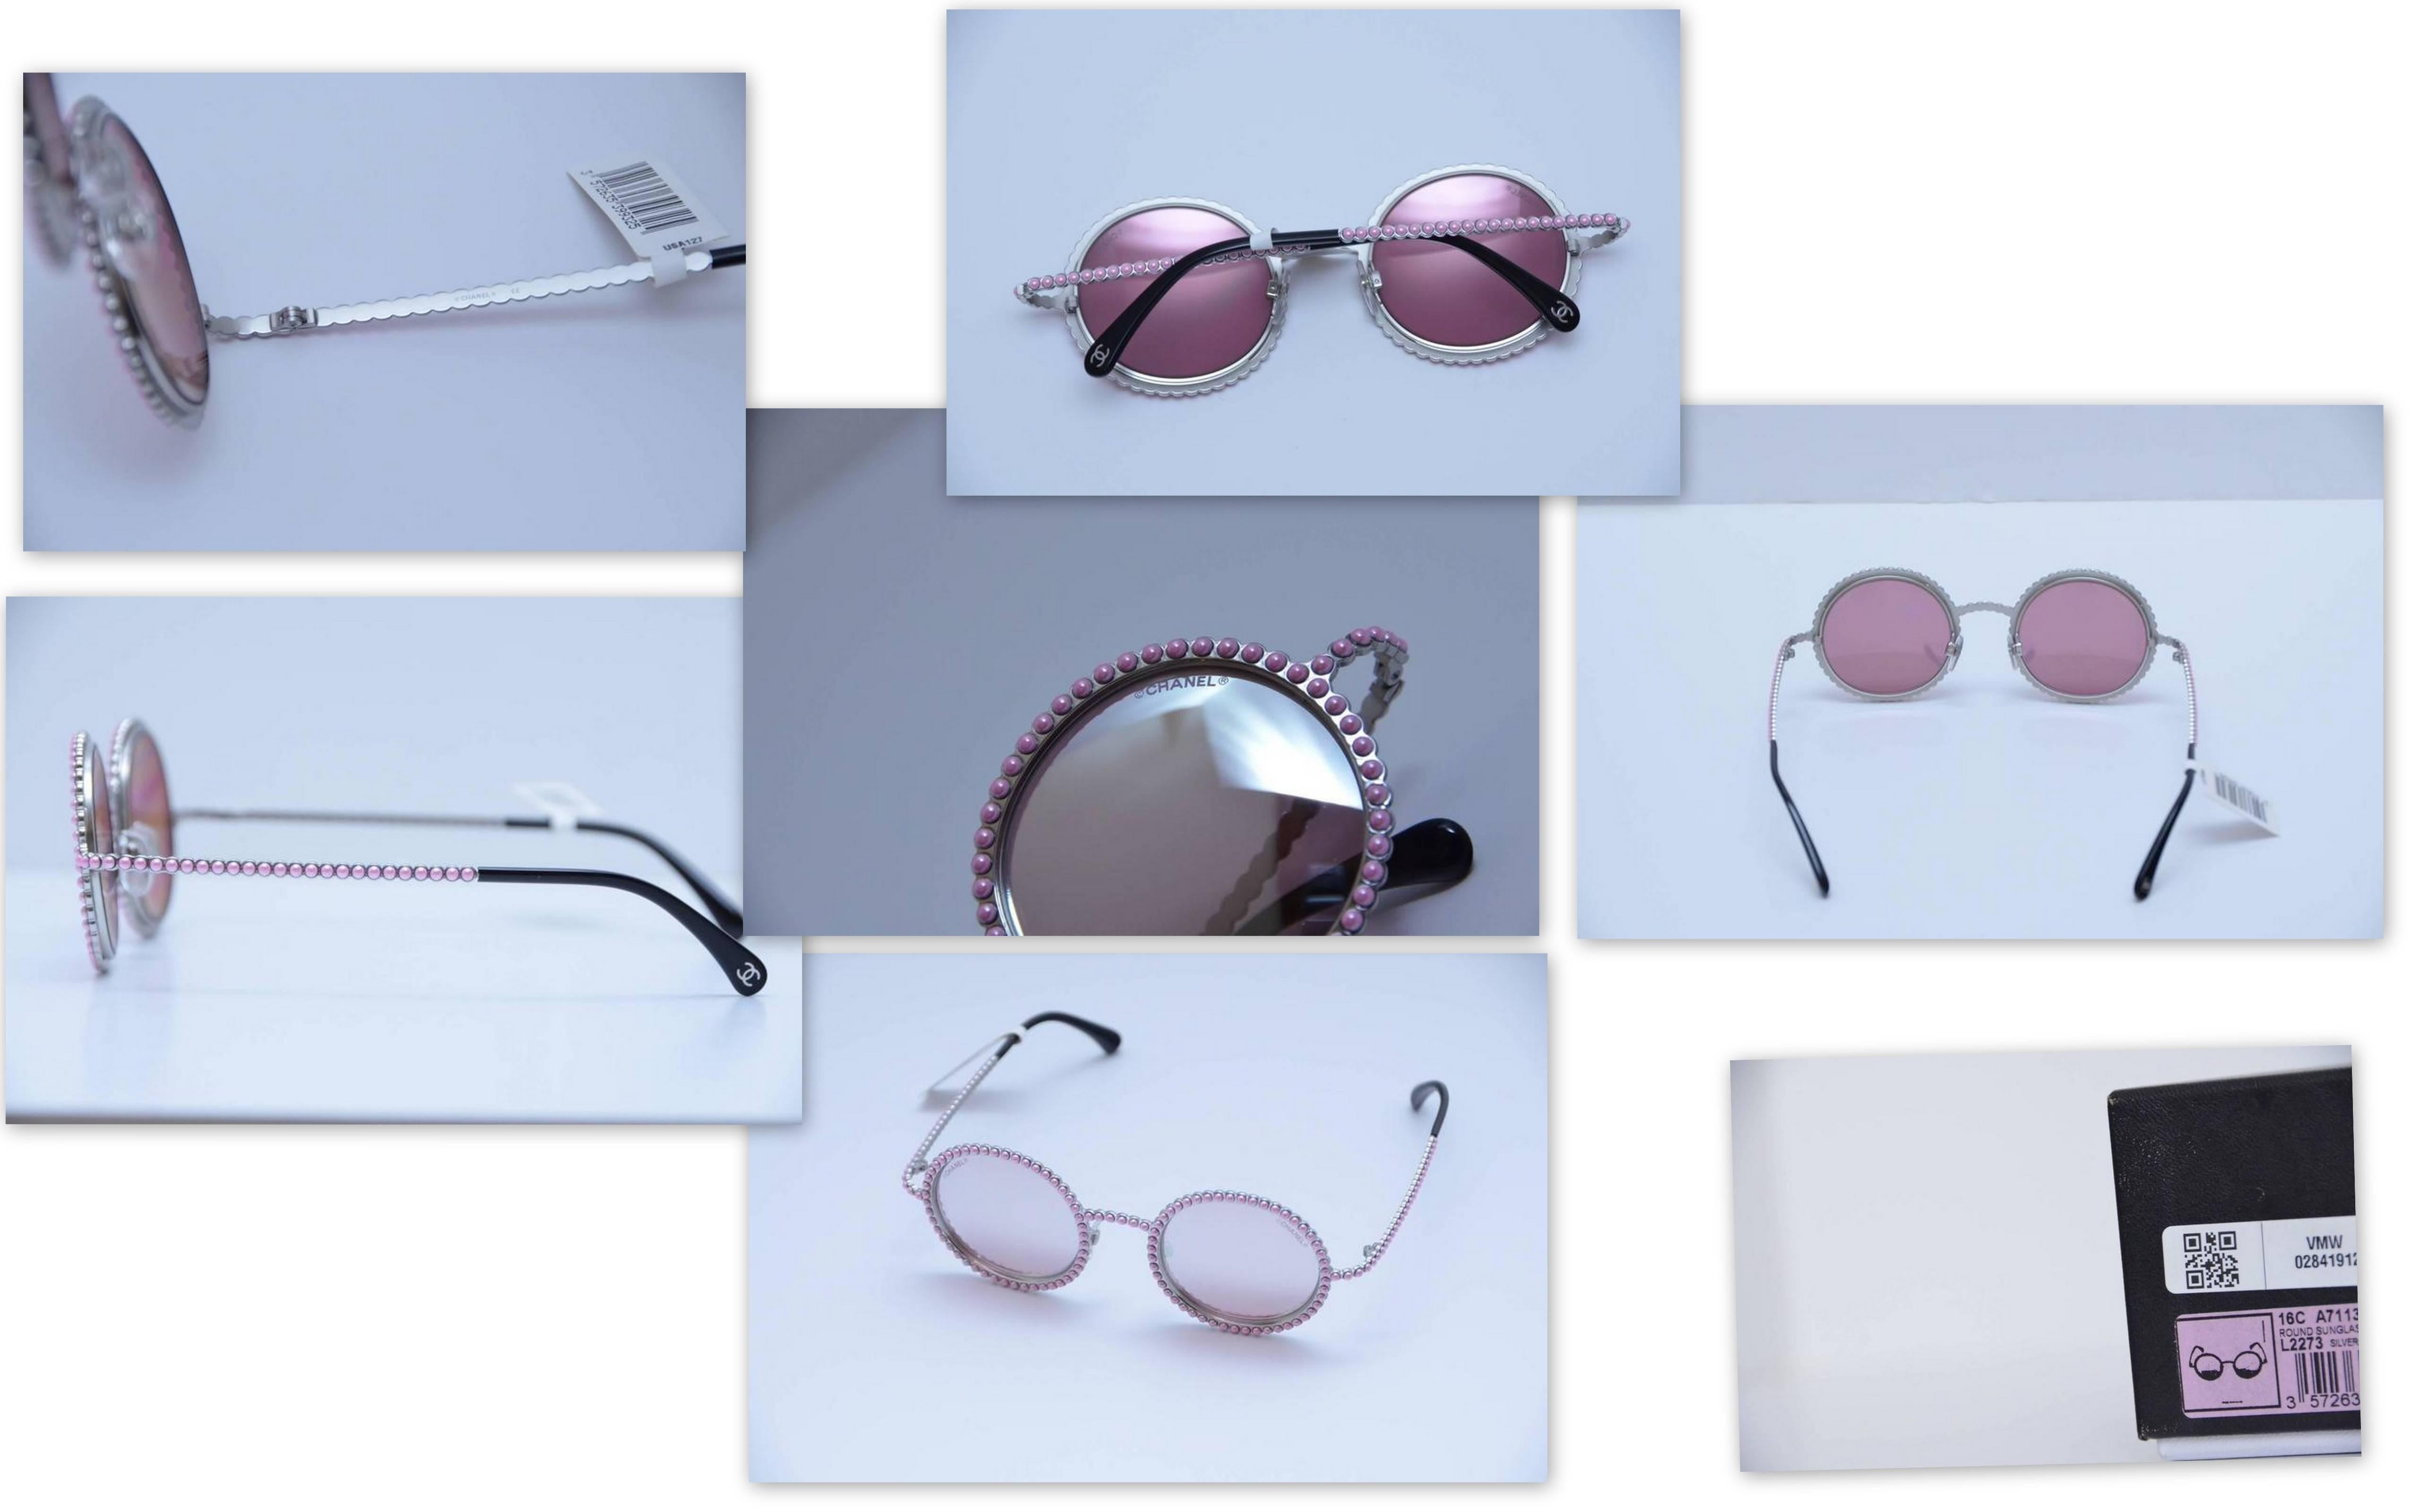 CHANEL pink pearl embellished and advertised by Rose Depp for Chanel.
Brand new with tag's,original case and box.
Made in Italy.
Lenses are mirror reflective pink tone color.

Sold out everywhere!

FINAL SALE.